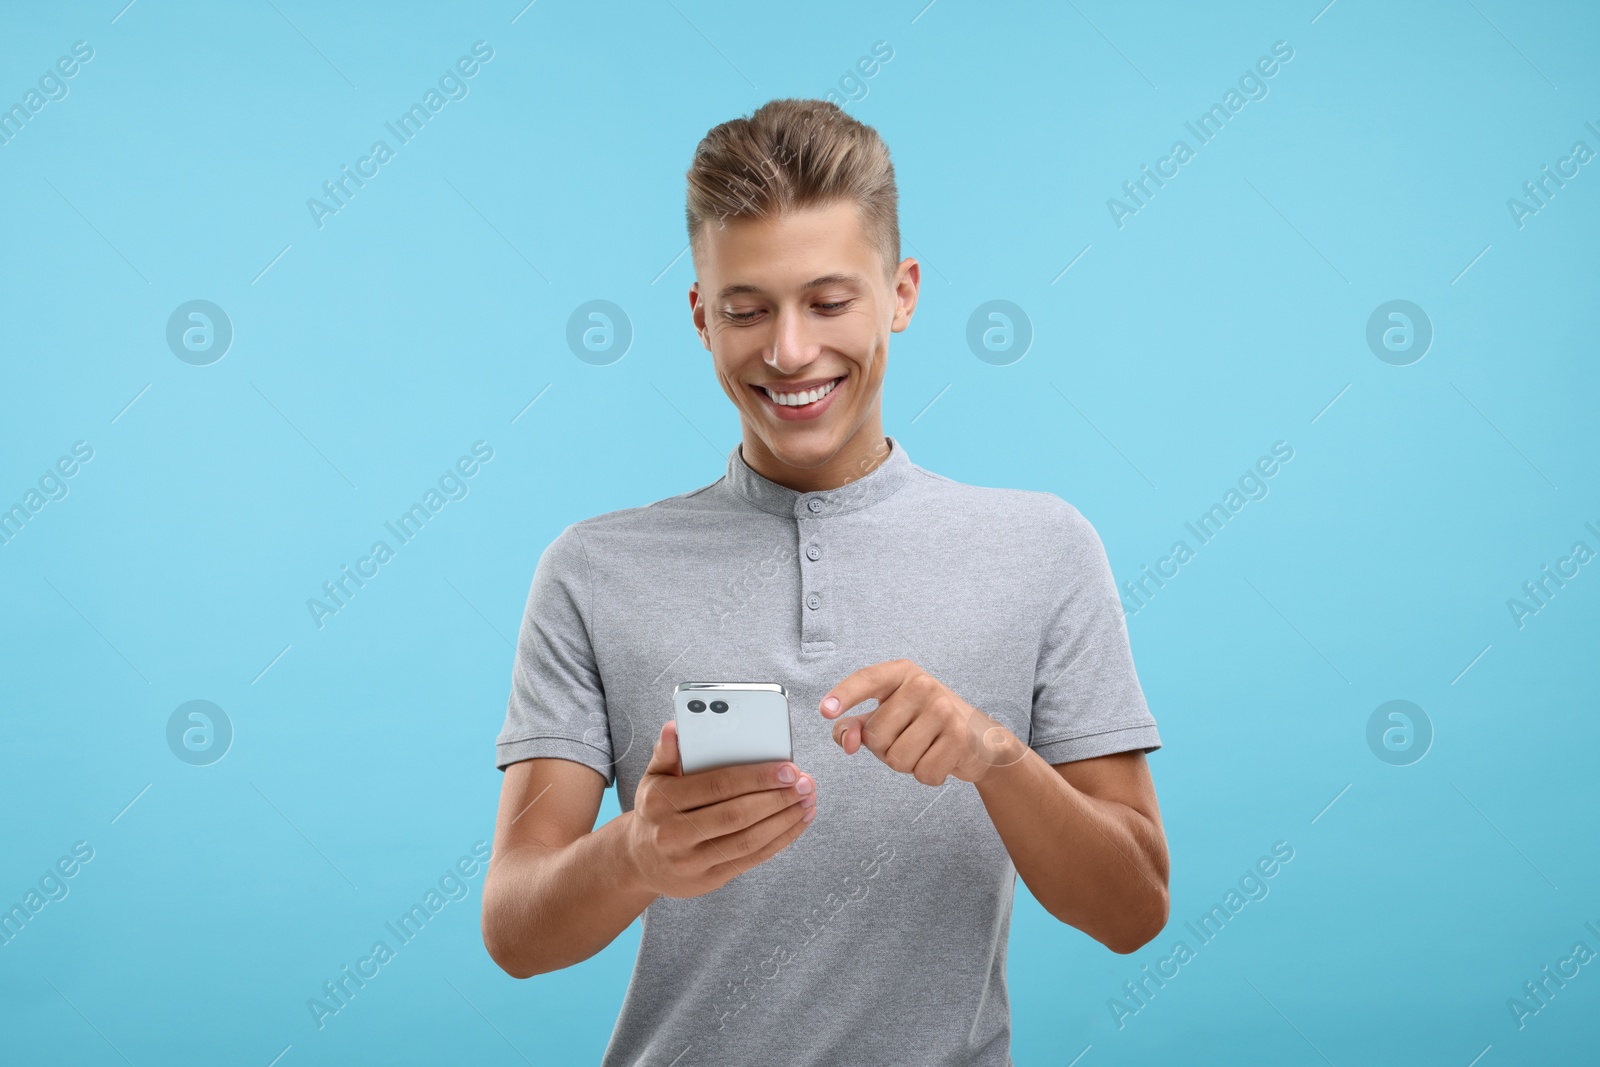 Photo of Happy young man sending message via smartphone on light blue background